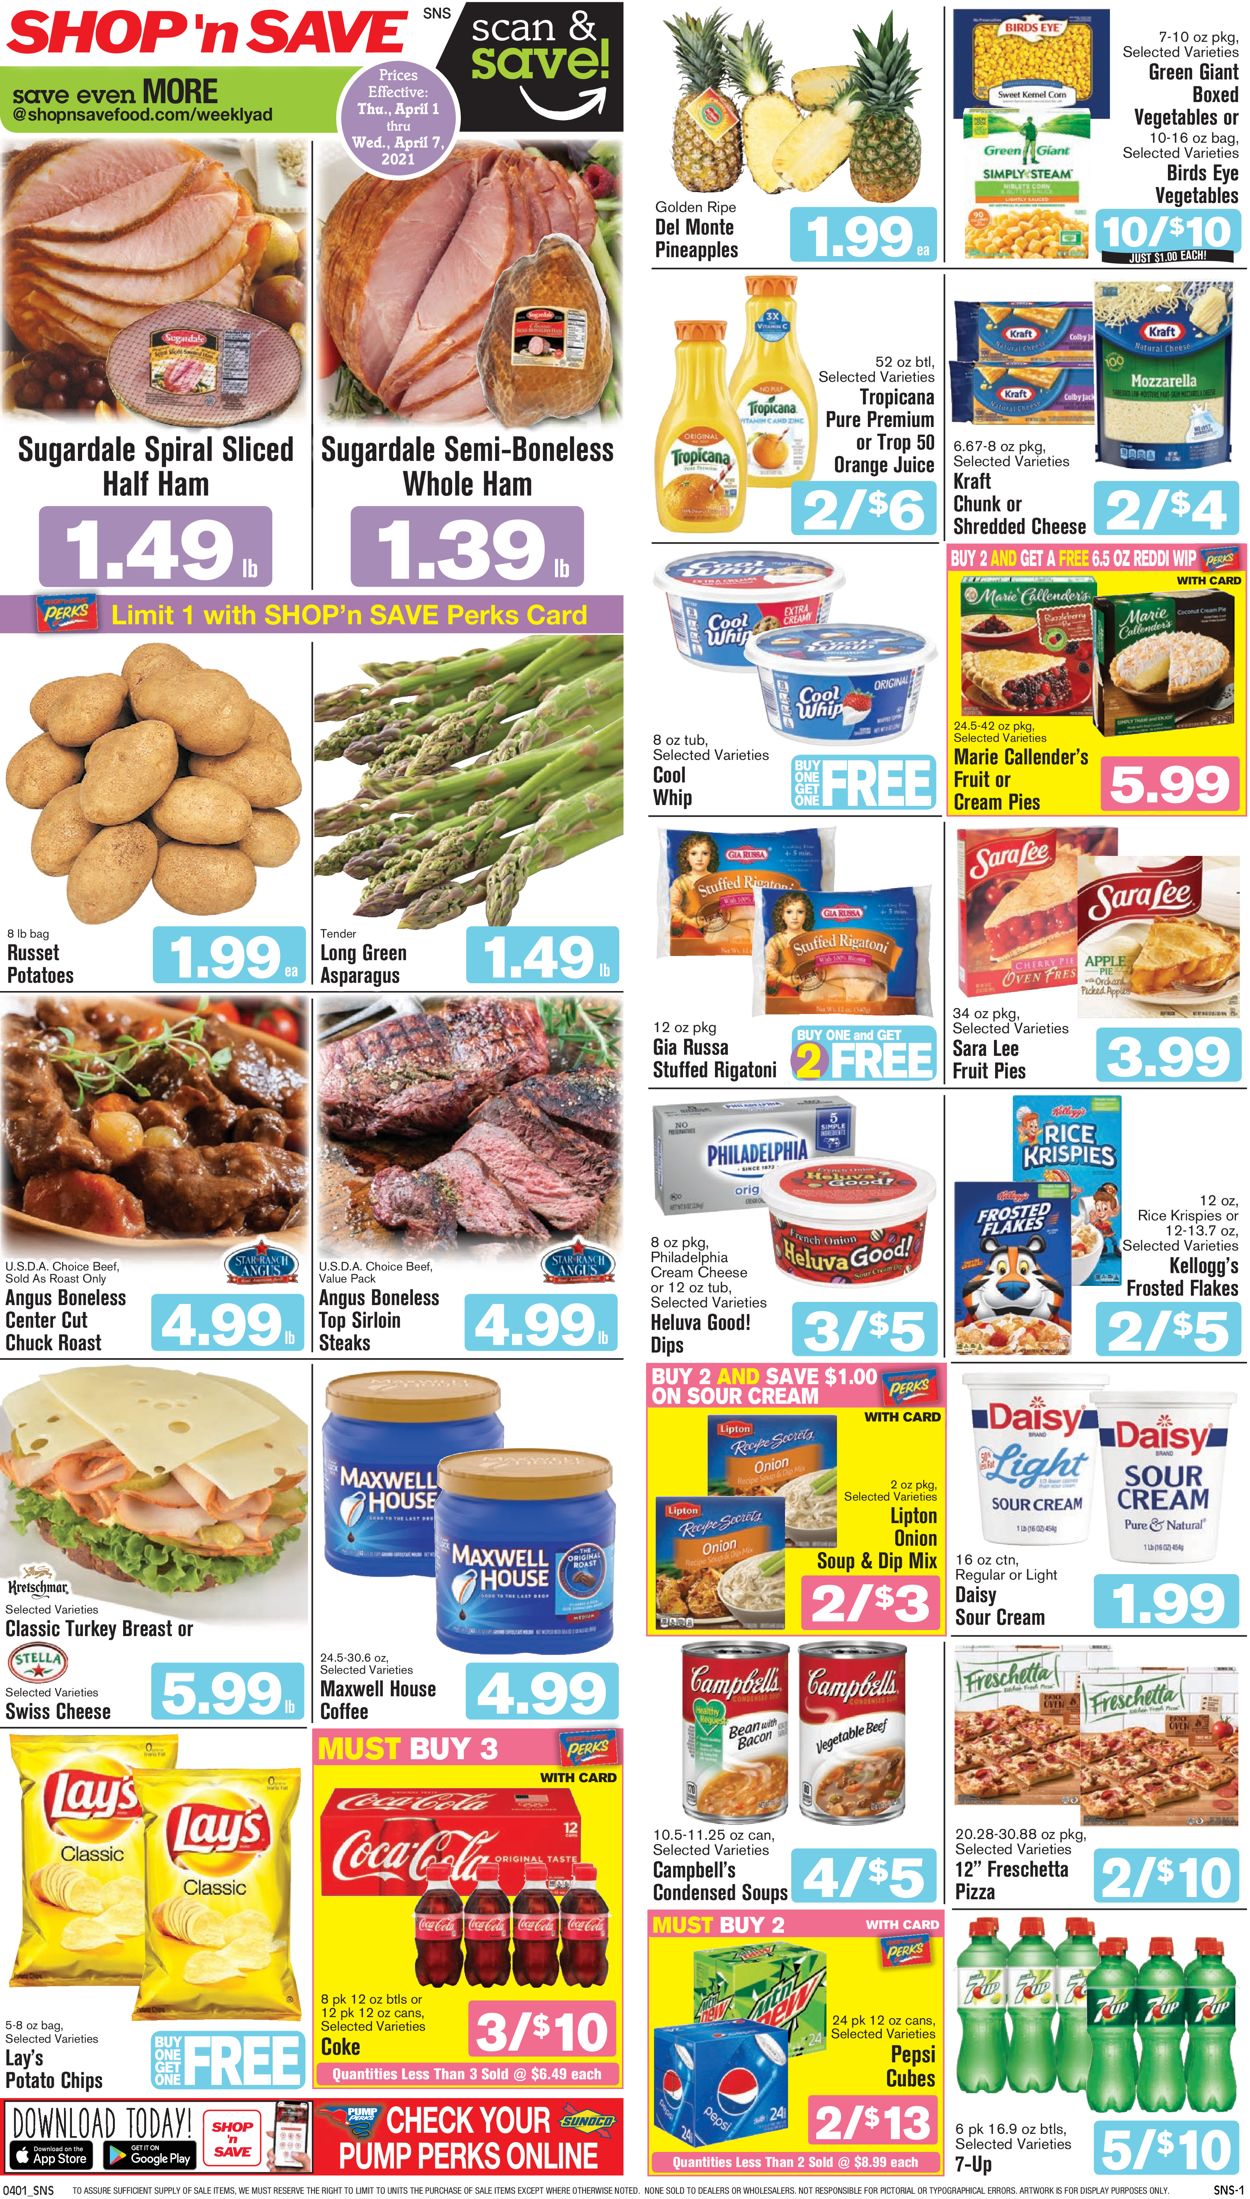 Catalogue Shop ‘n Save (Pittsburgh) Easter 2021 ad from 04/01/2021